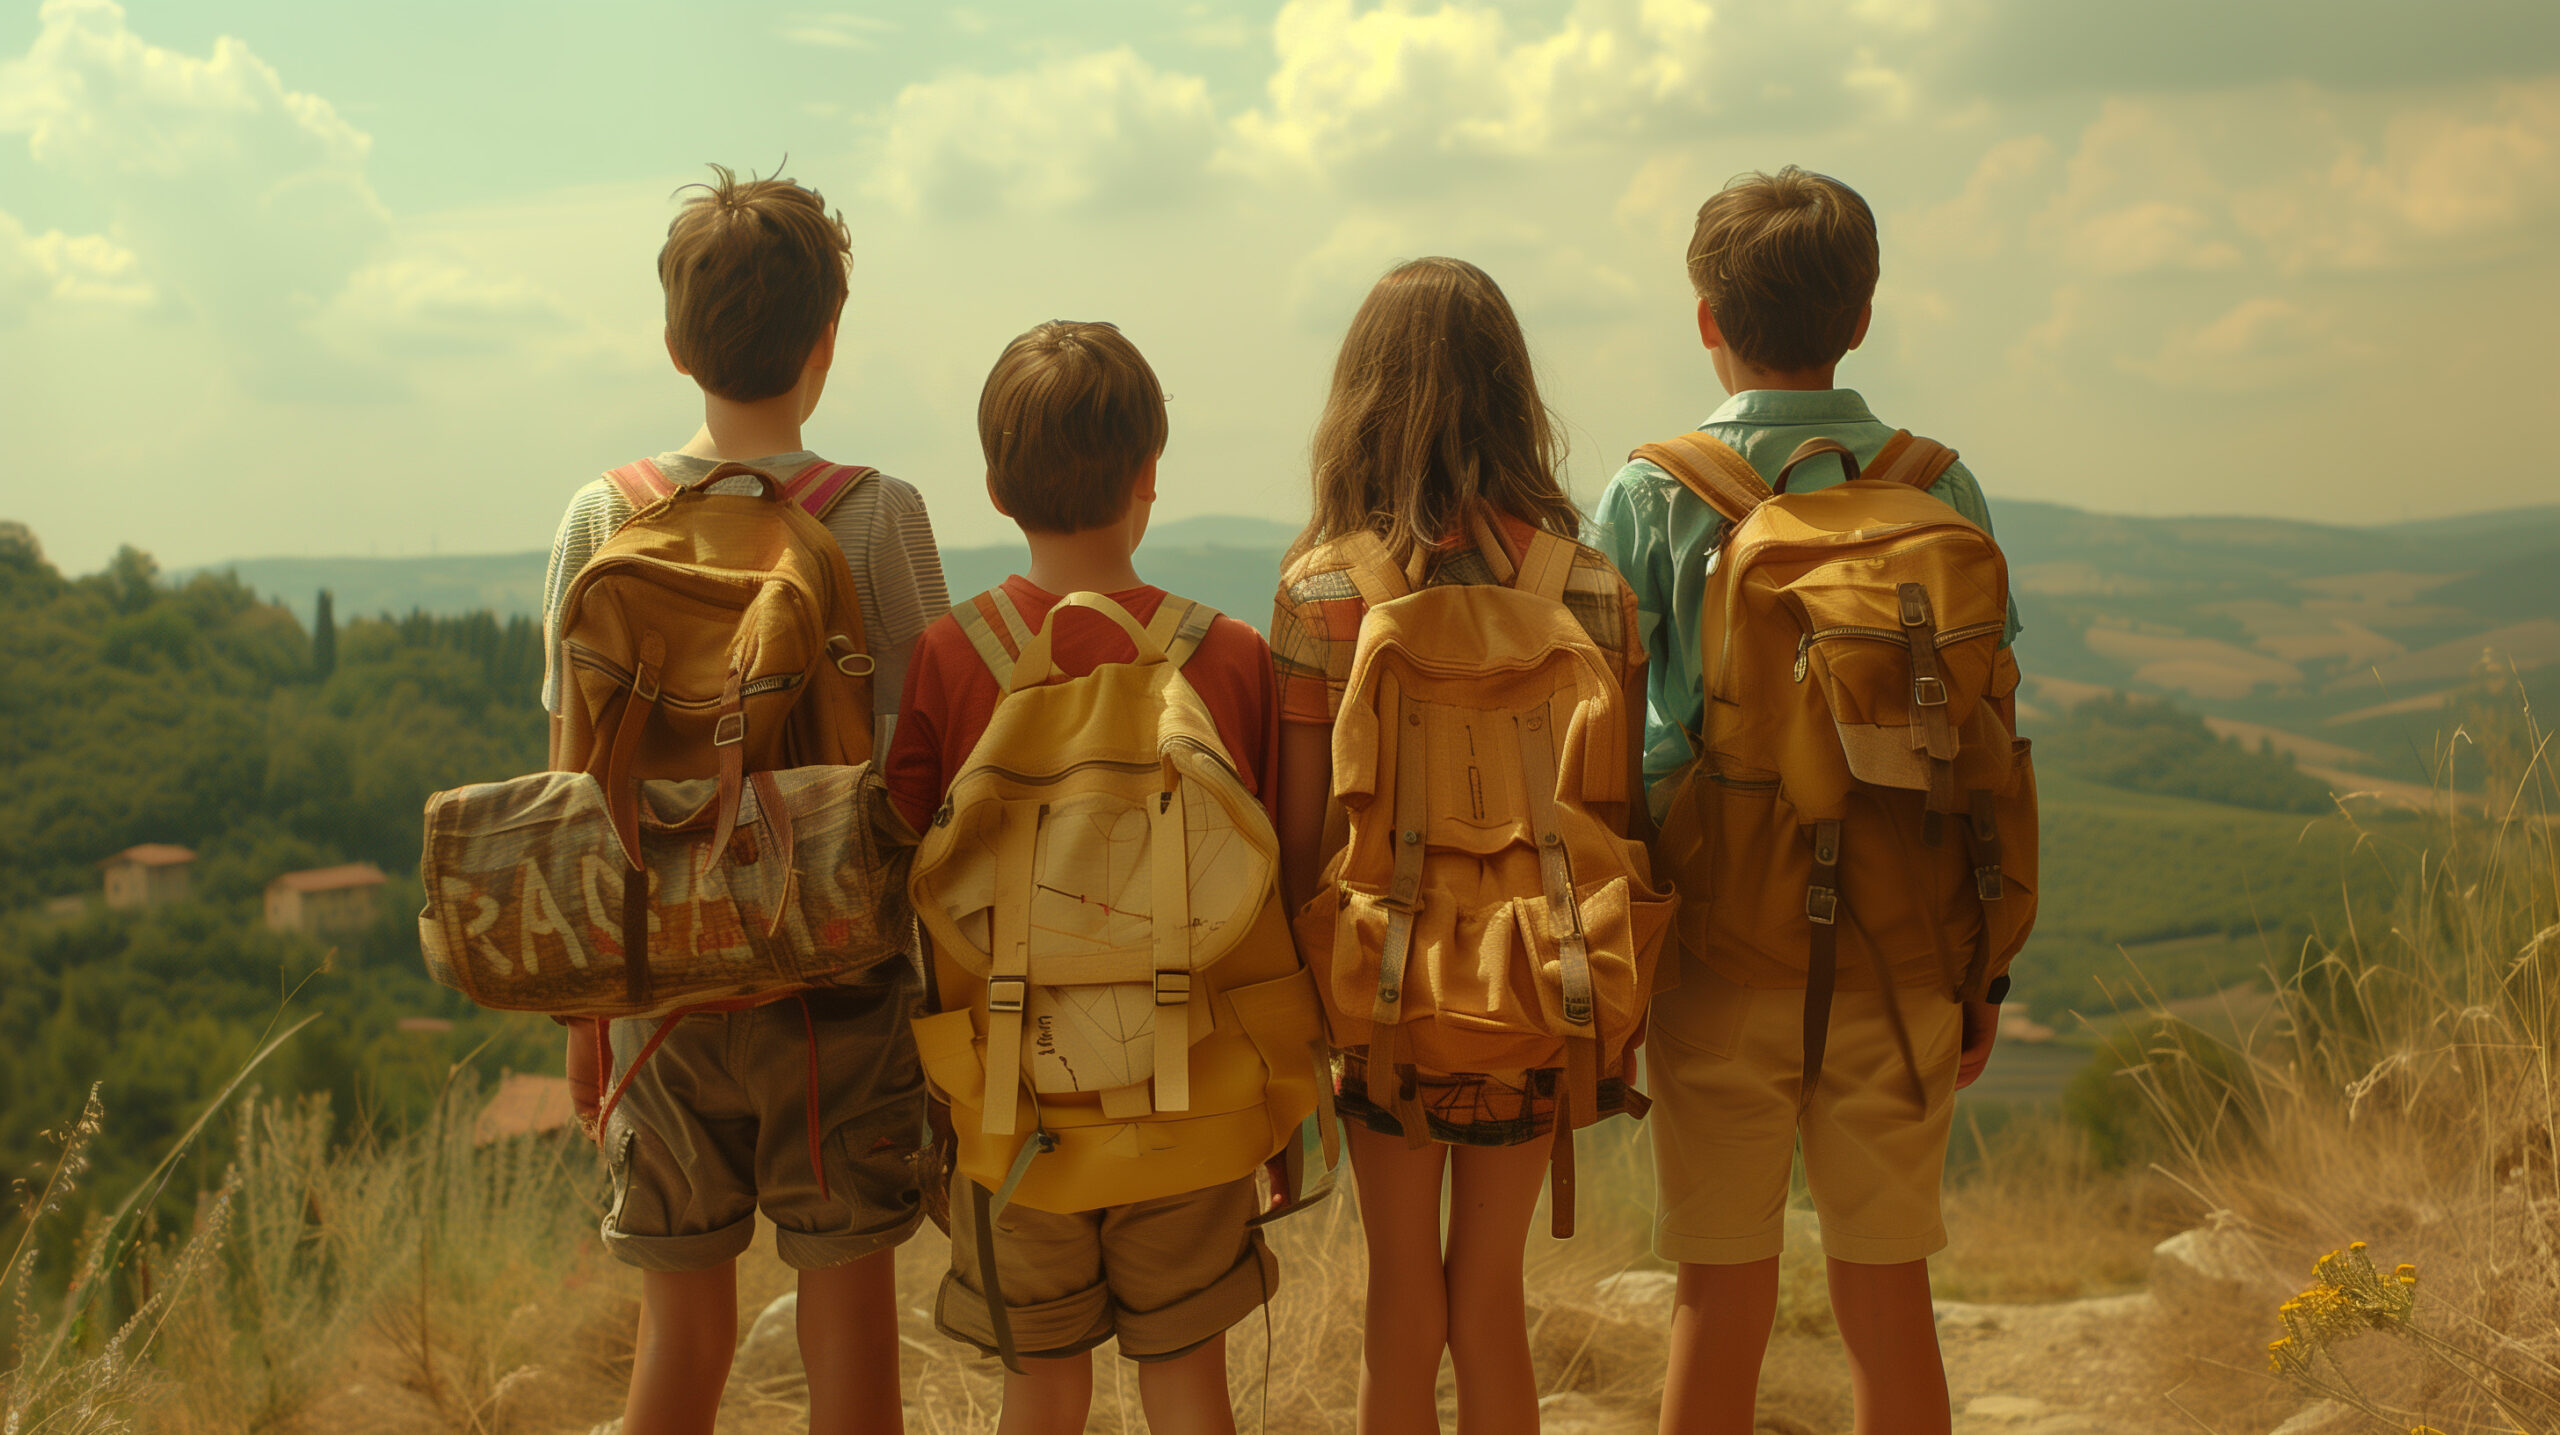 bobbyg7187_Wide_Shot_Four_children_with_backpacks_standing_at_t_303b3454-25d4-469c-bae3-49017ea5e103-1 copy